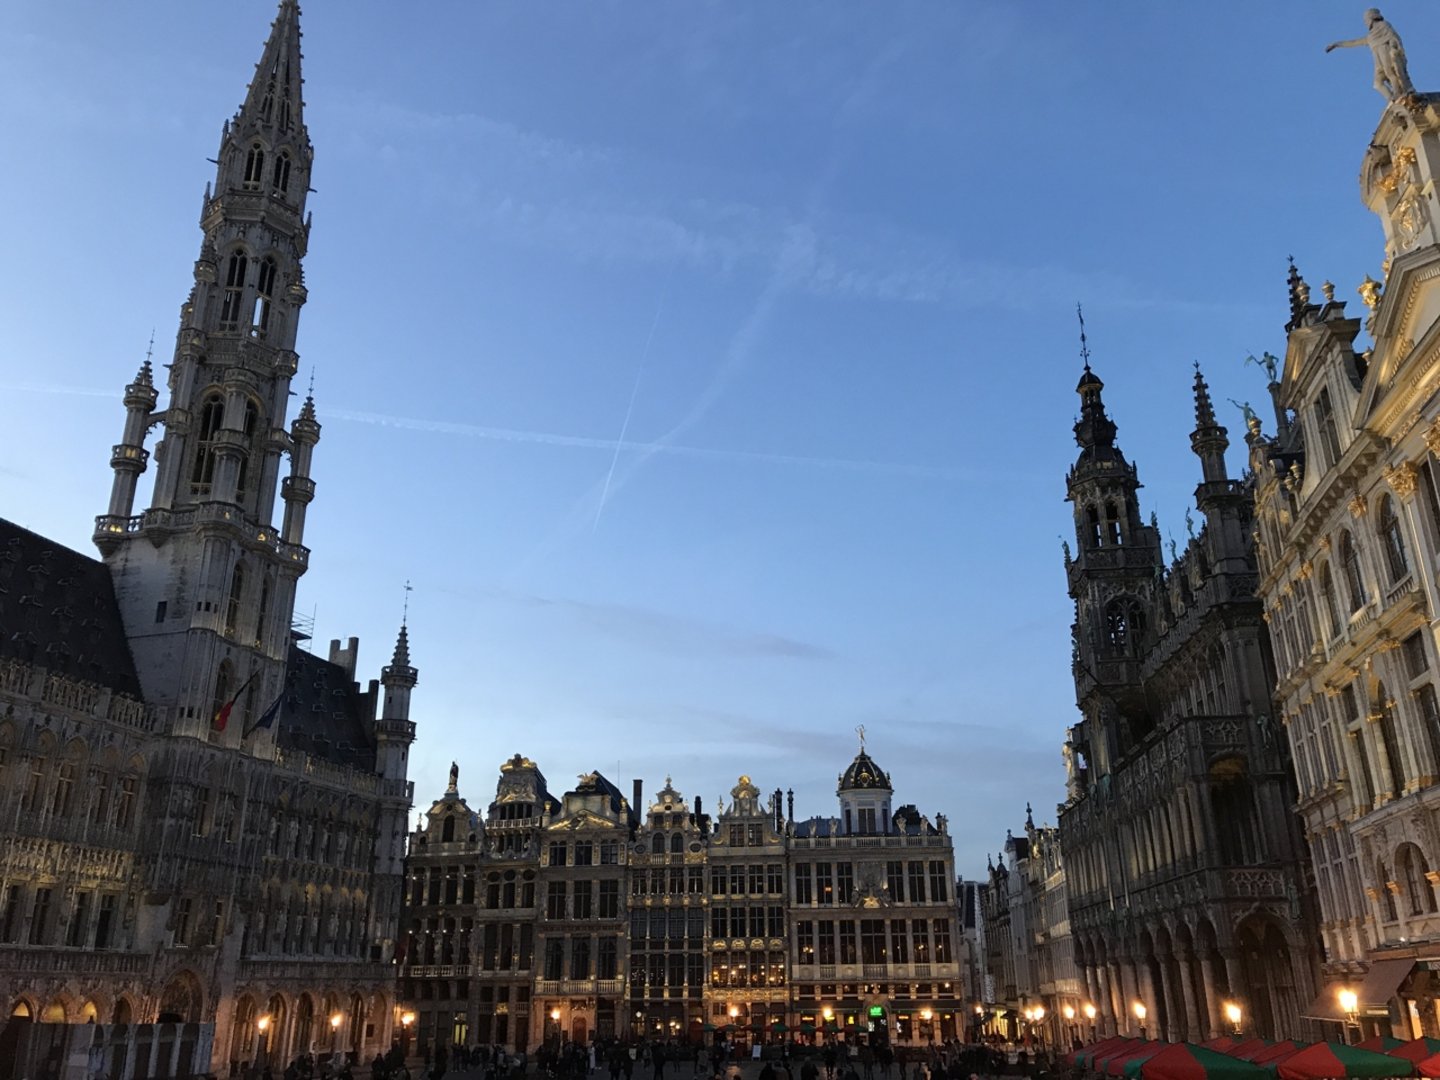 Grote Markt in Brussels at dawn